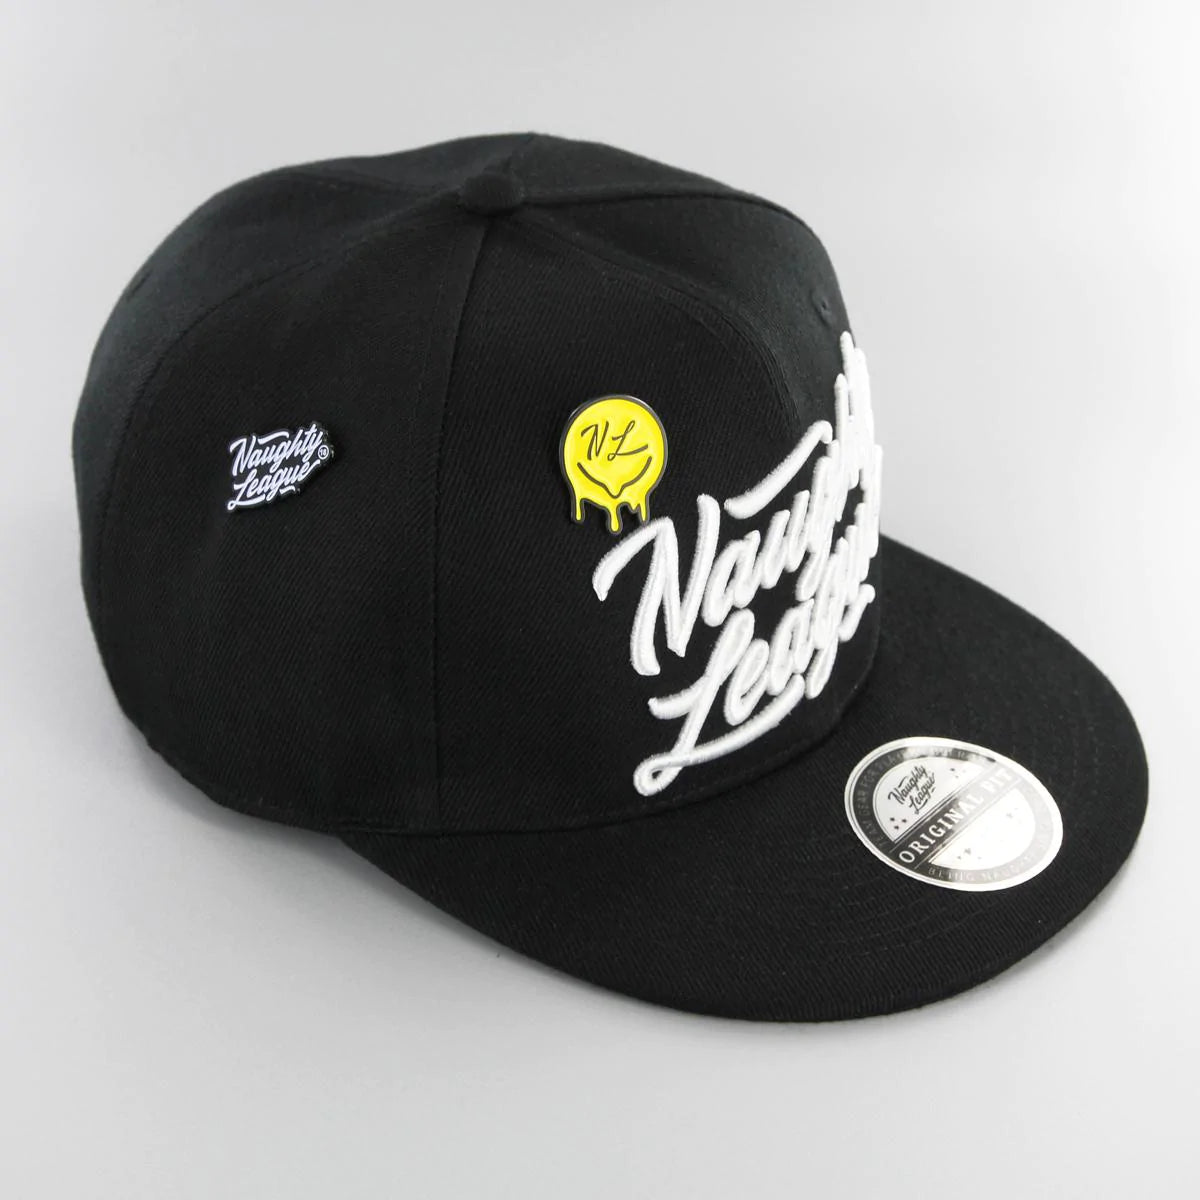 Branded Fitted Cap Black/White